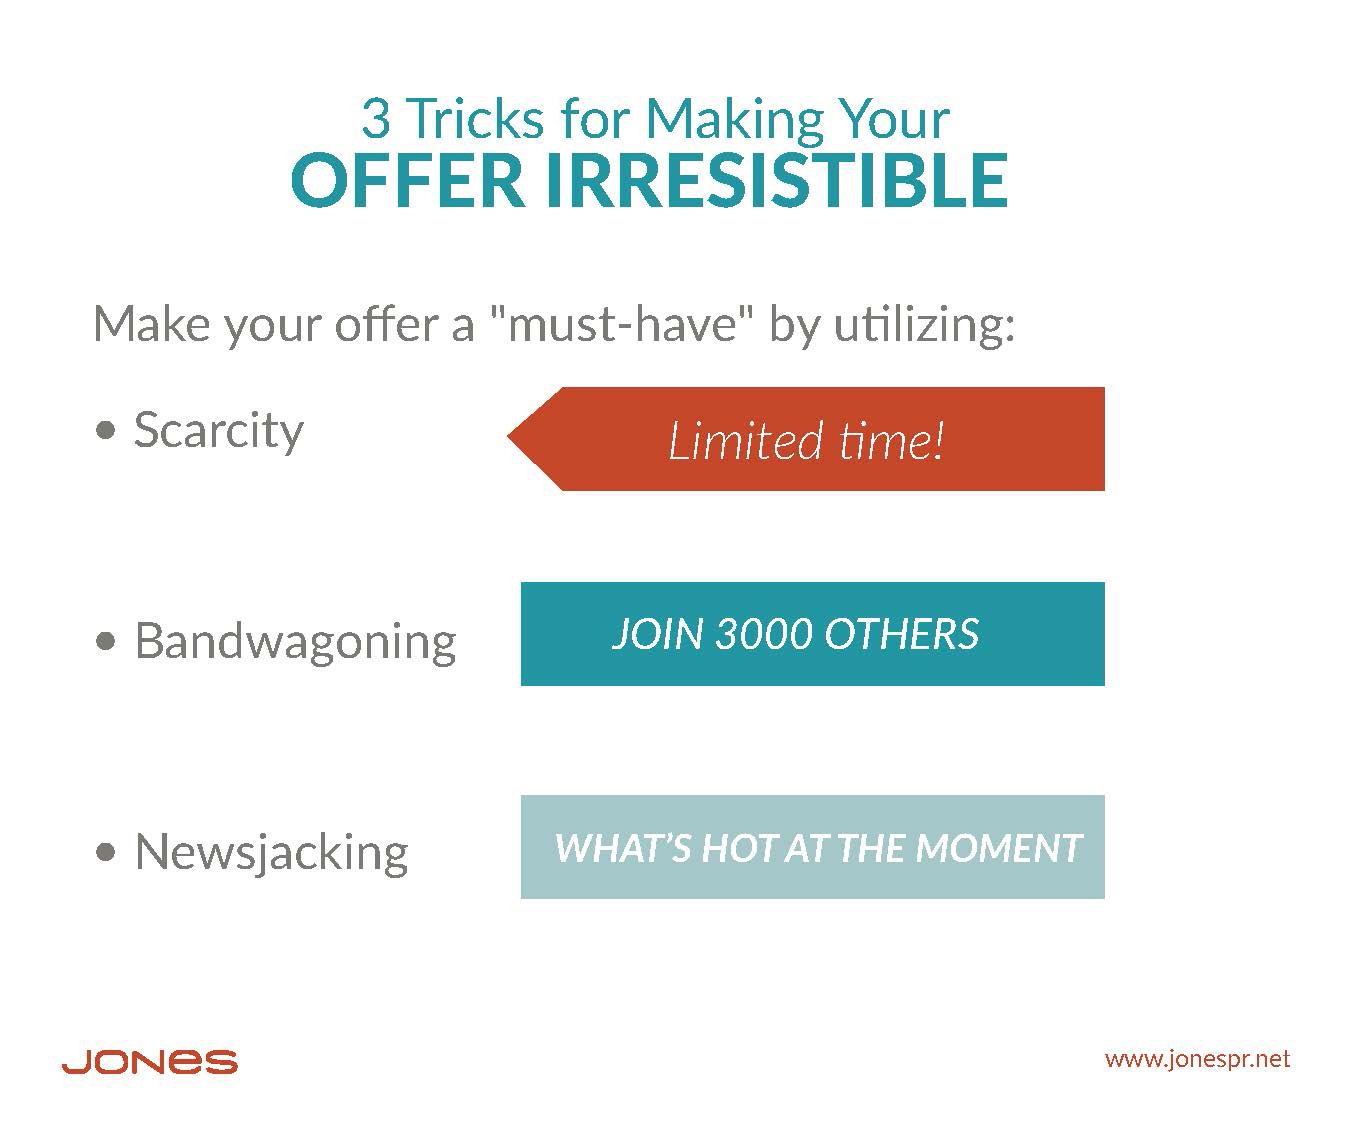 3 Tricks for Making Your Offer Irresistible to Leads